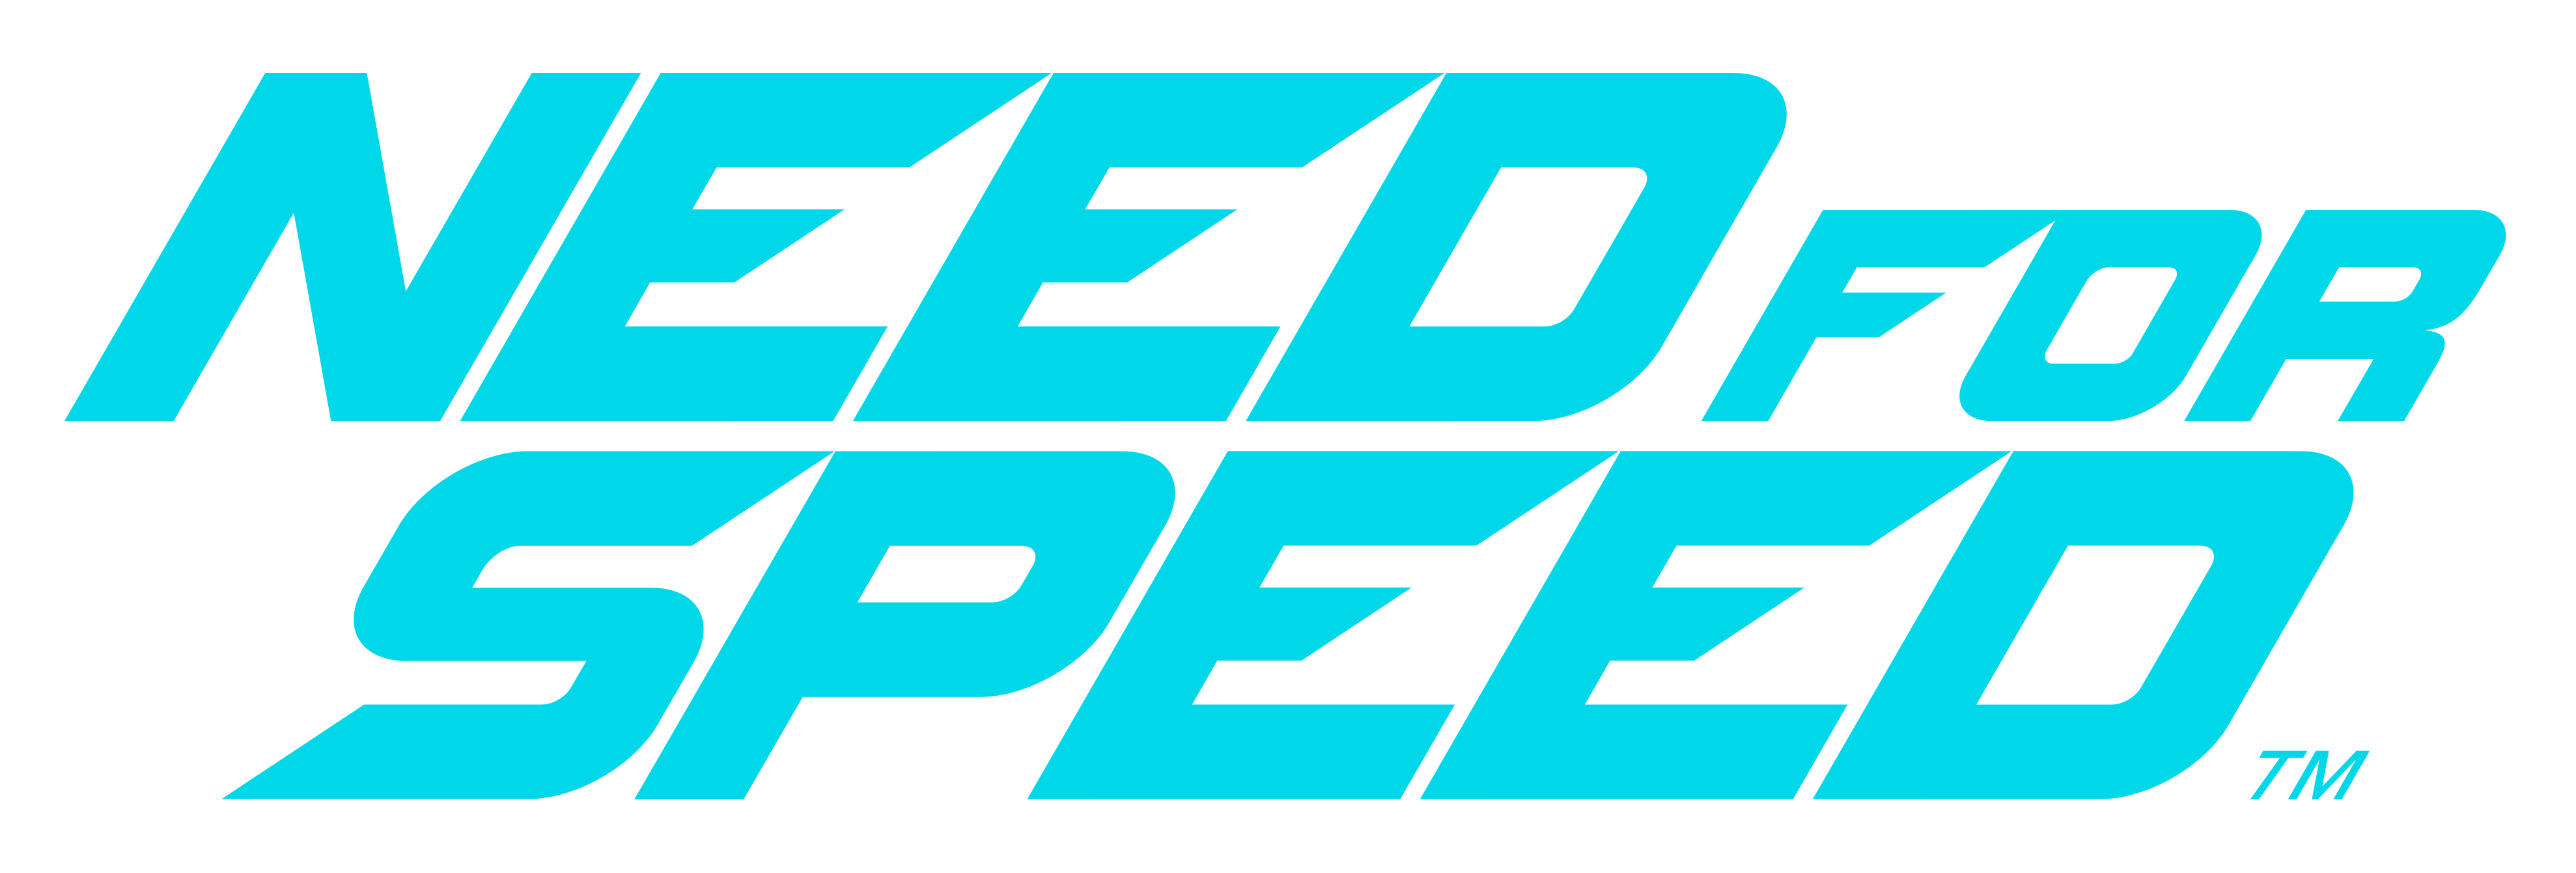 Need For Speed Logo Free PNG